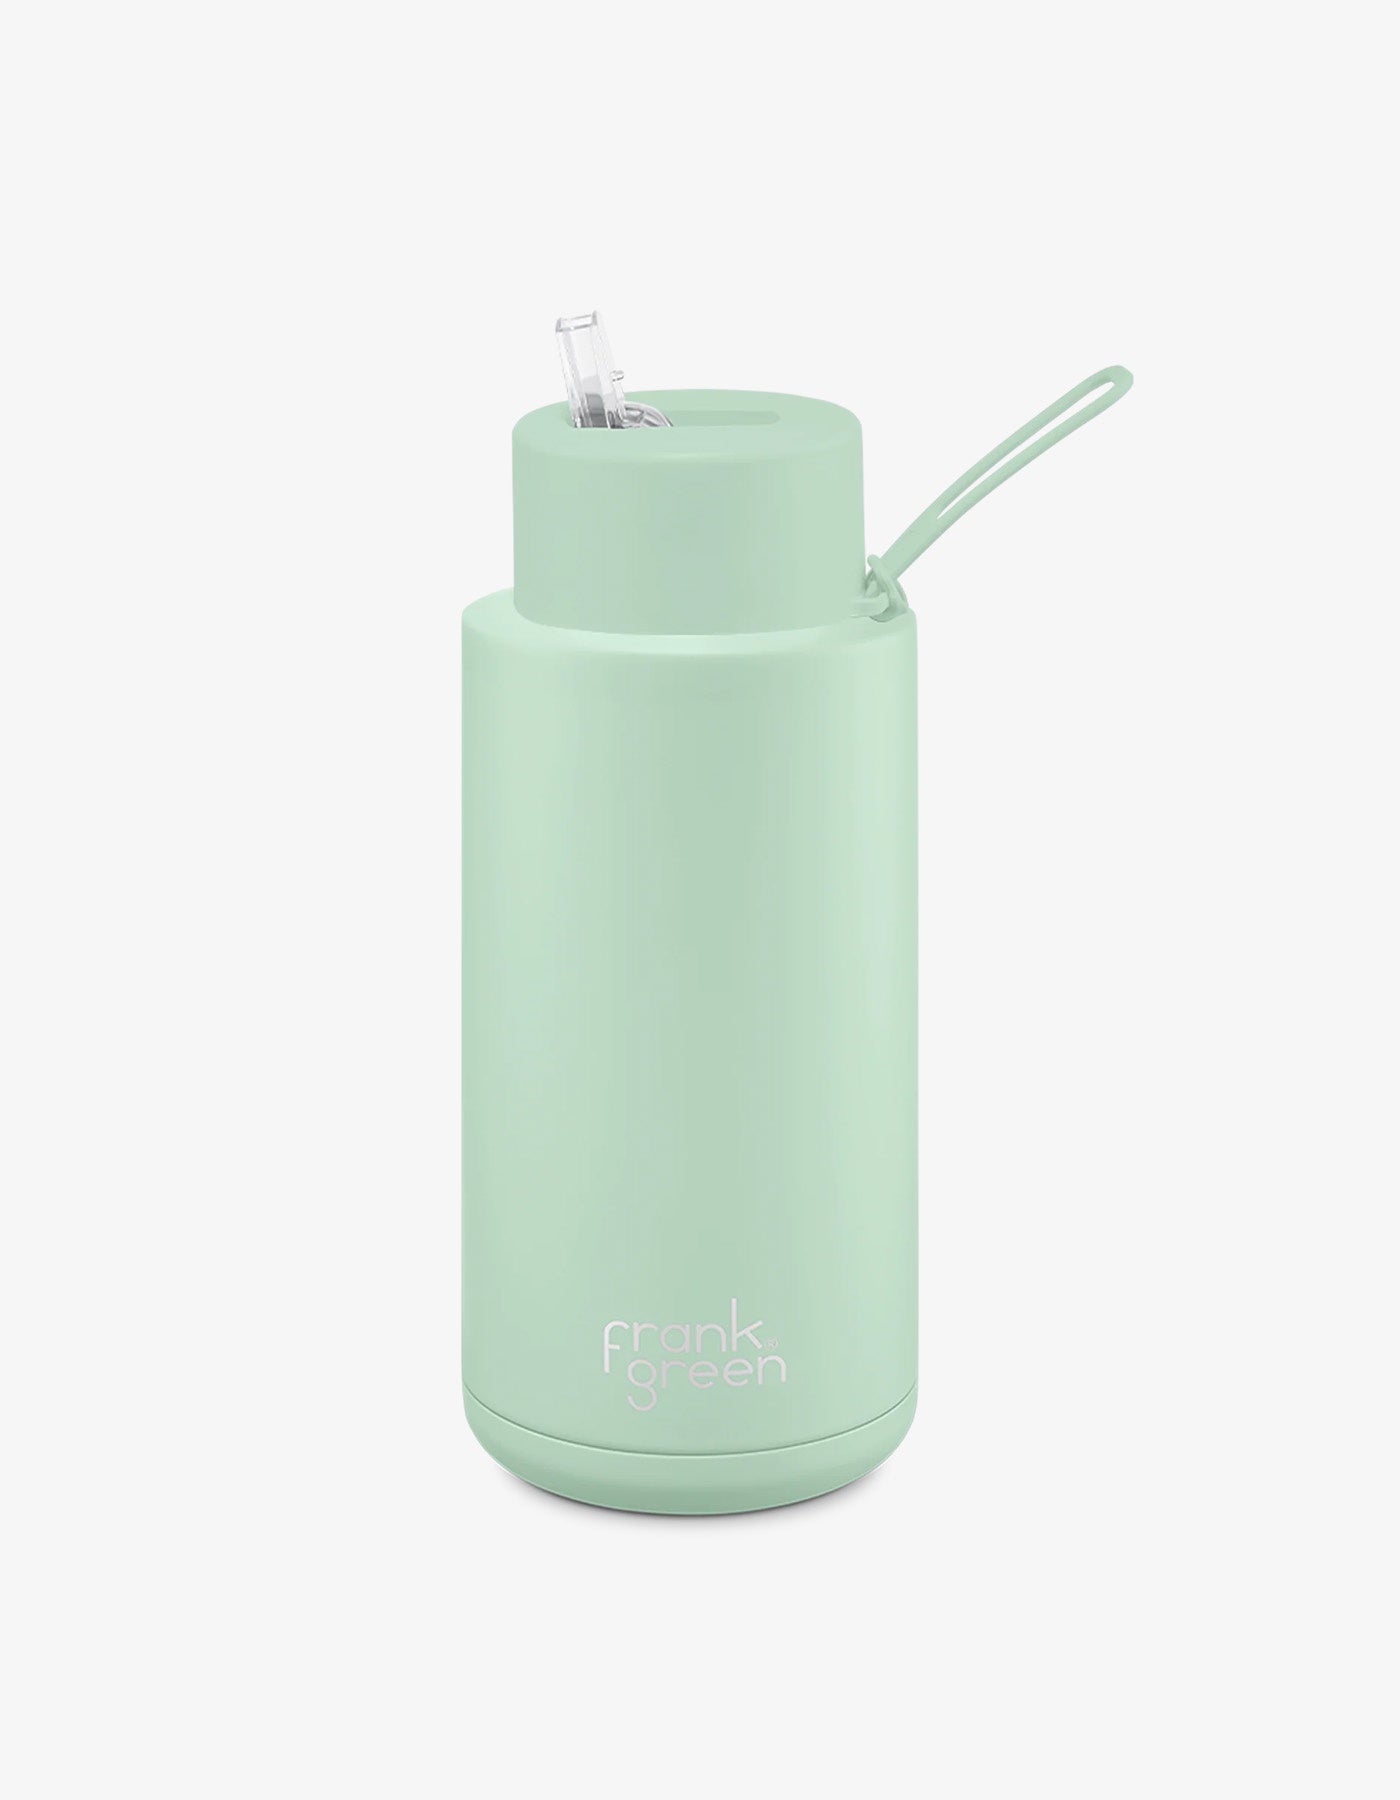 Frank Green 34oz Stainless Steel Ceramic Reusable Bottle Gelato with Straw Lid